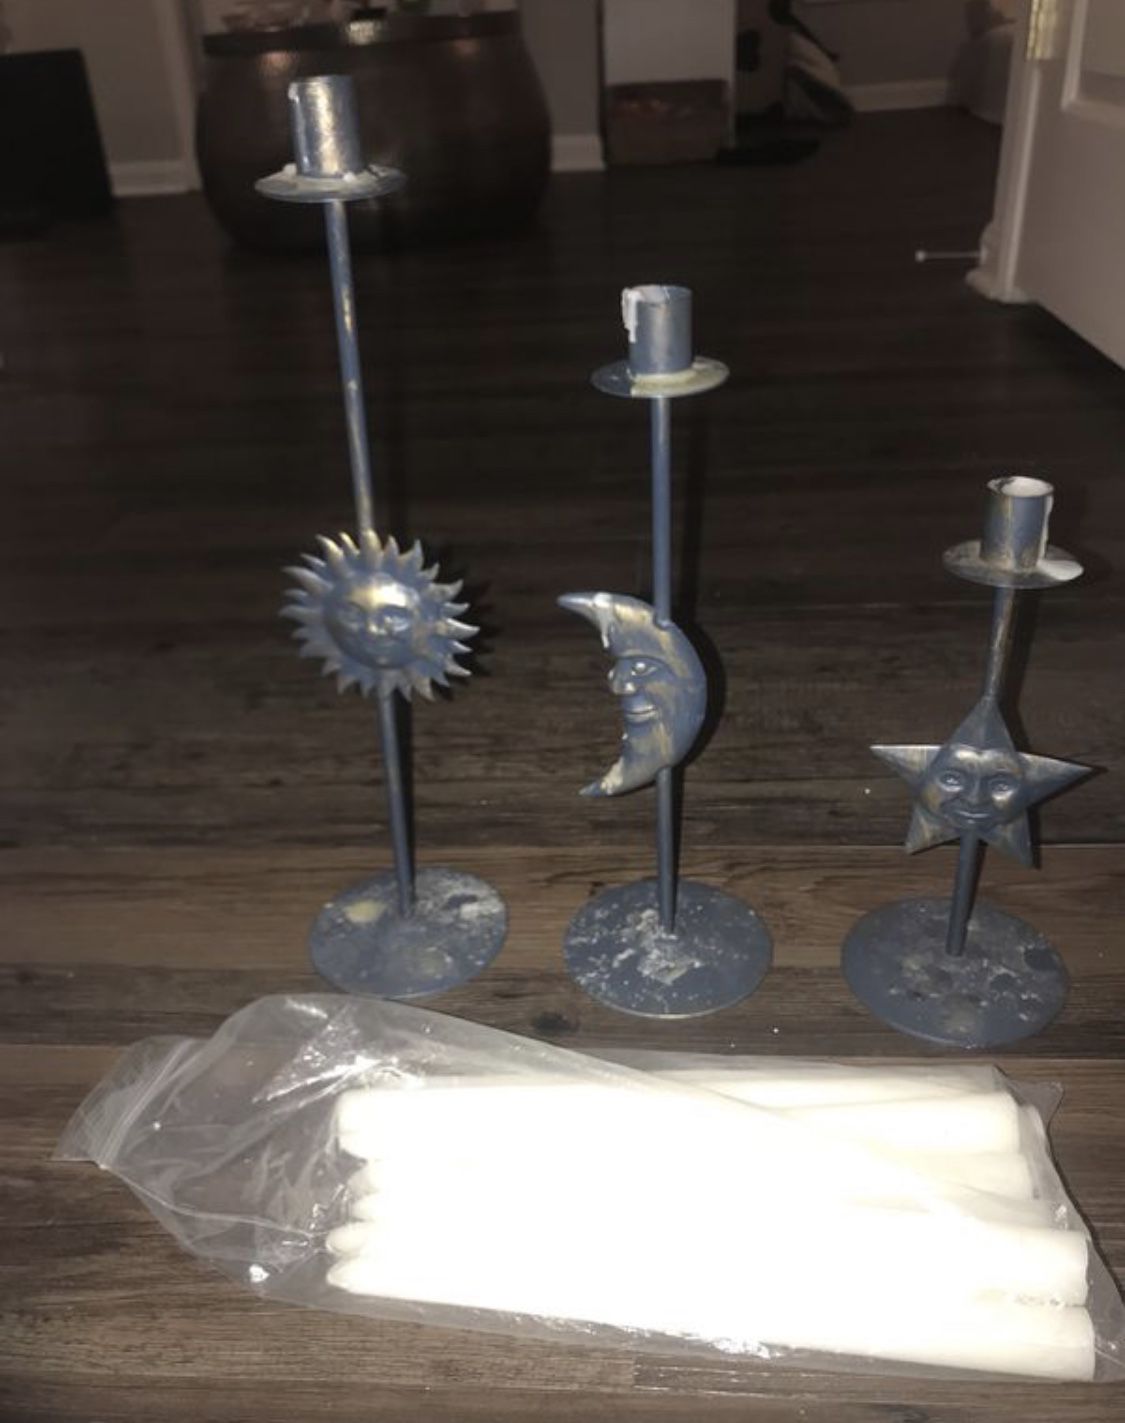 Sun moon star candle set with 9 unscented pillar candle sticks